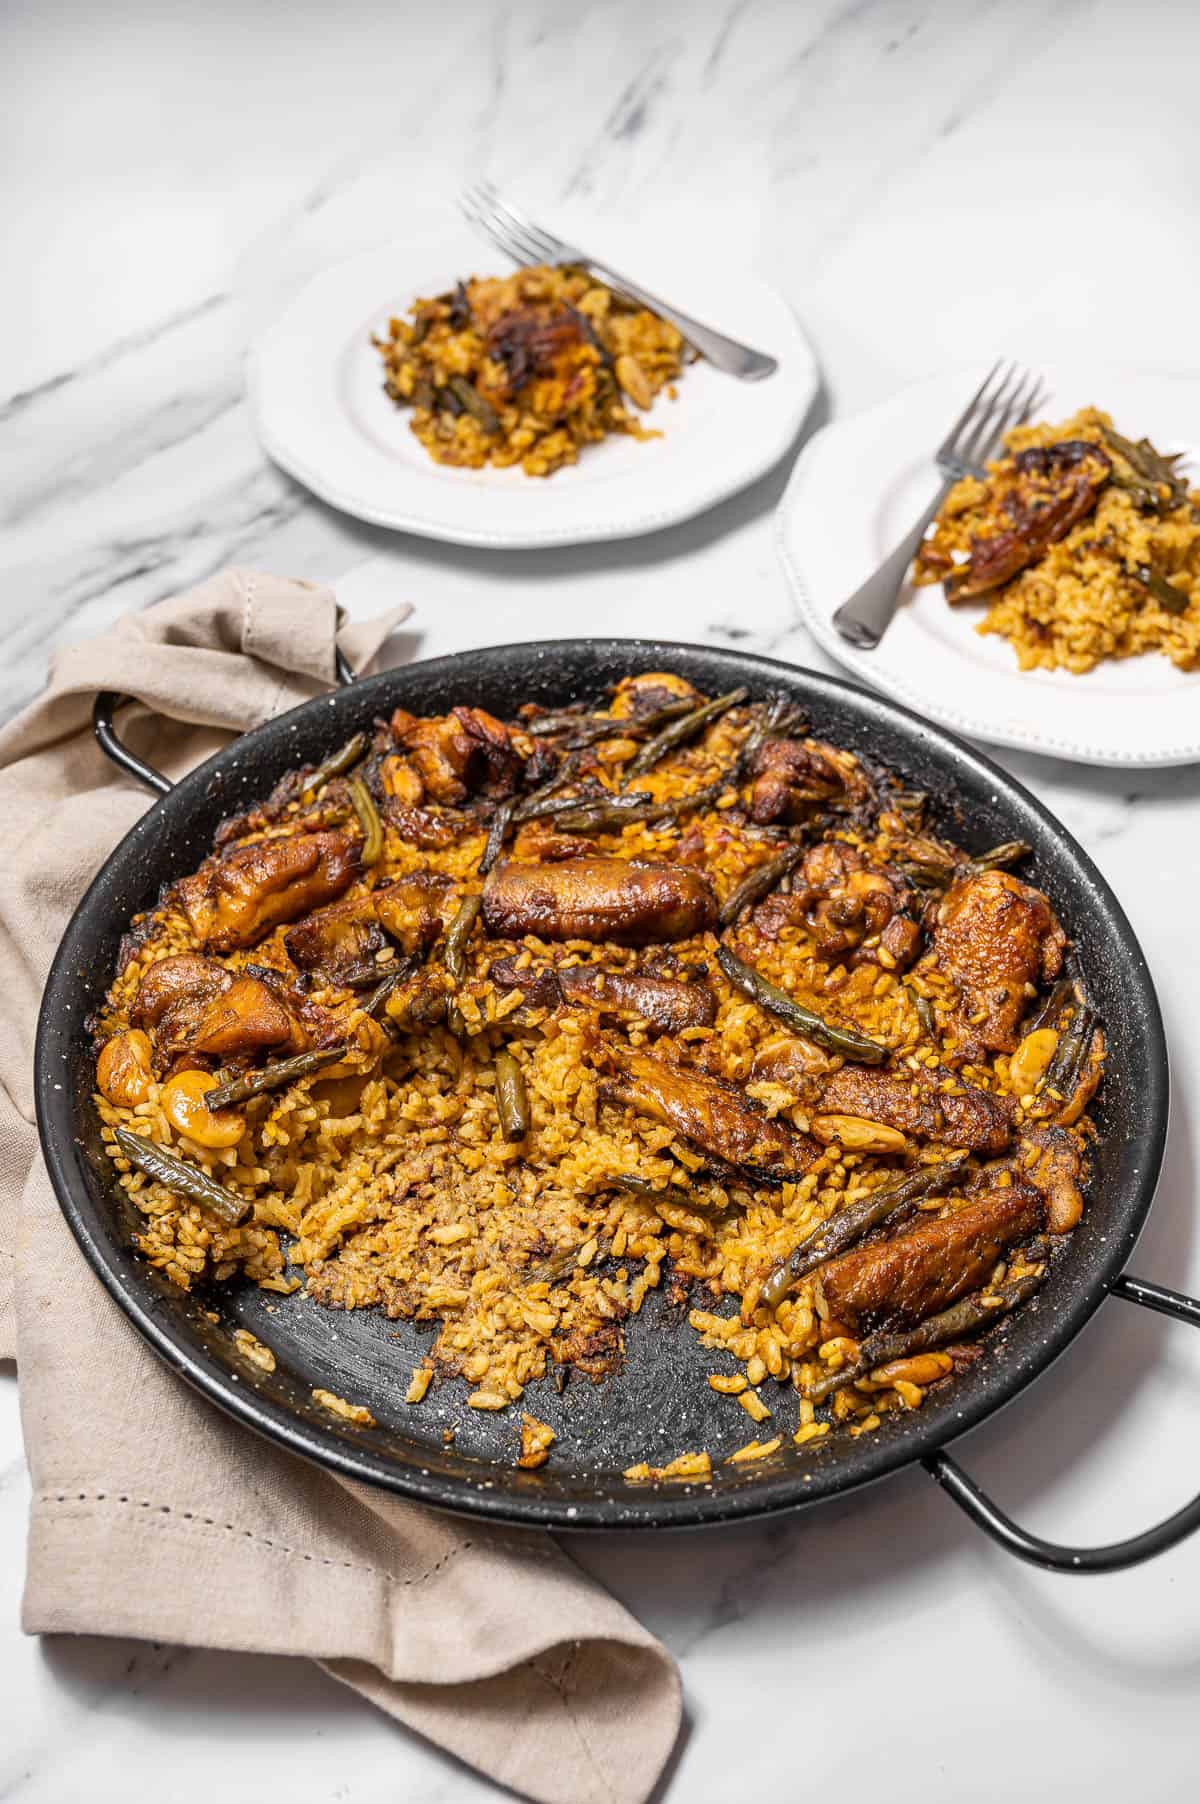 Spanish rice with vegetables and chicken in a big paella pan with two servings on plates.